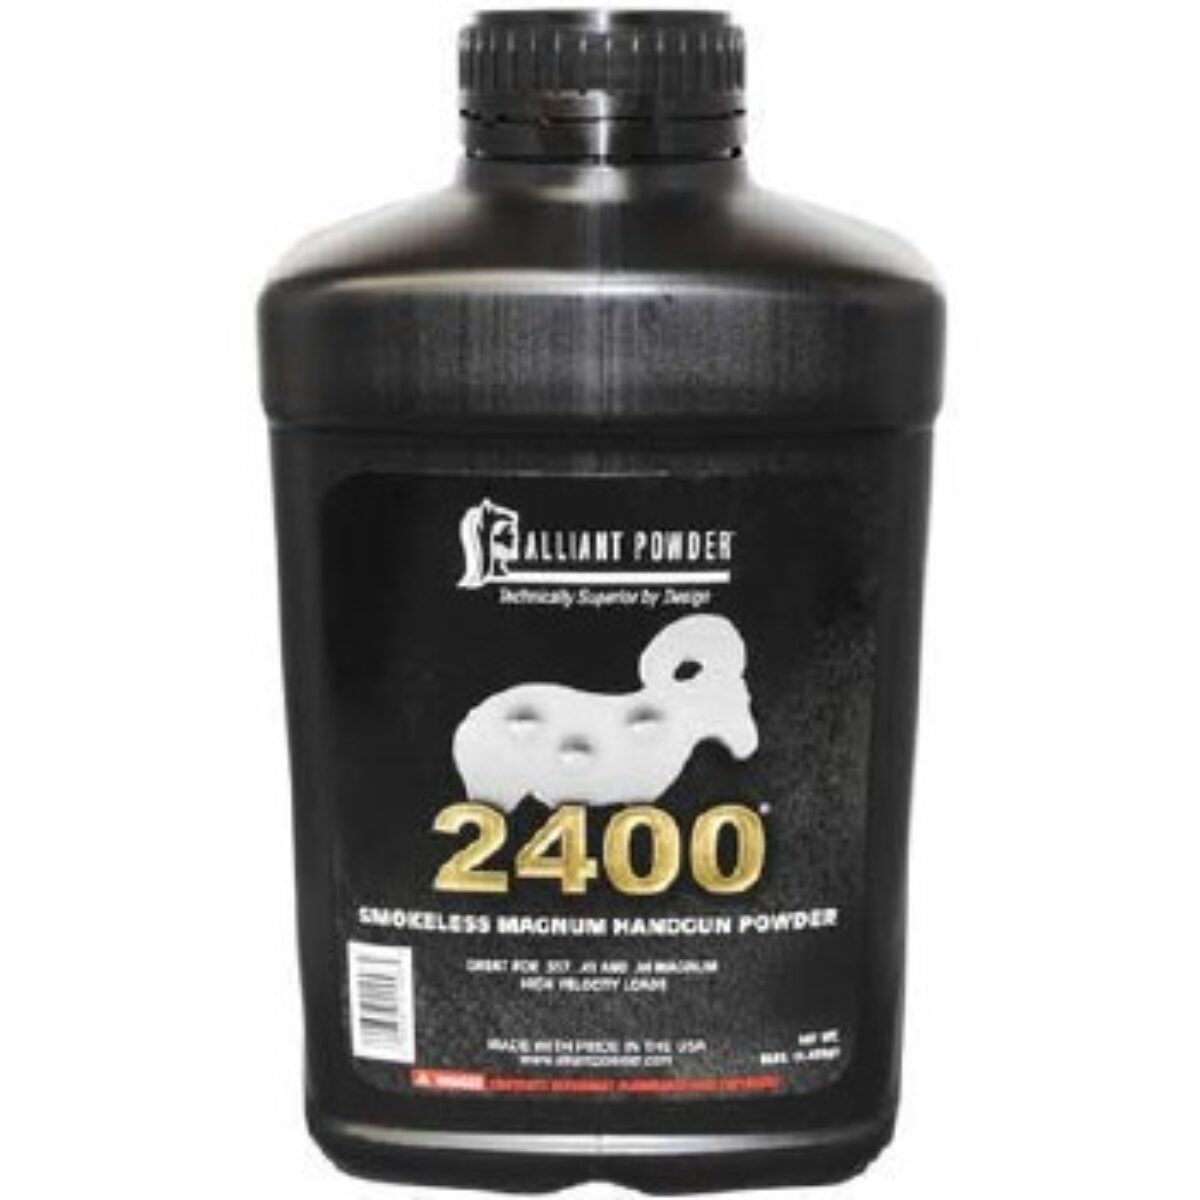 Alliant Powder – 2400 8lbs -|Alliant Powder On Promotion| Real safe  Firearms - Buy Cheap Firearms and Amunations online